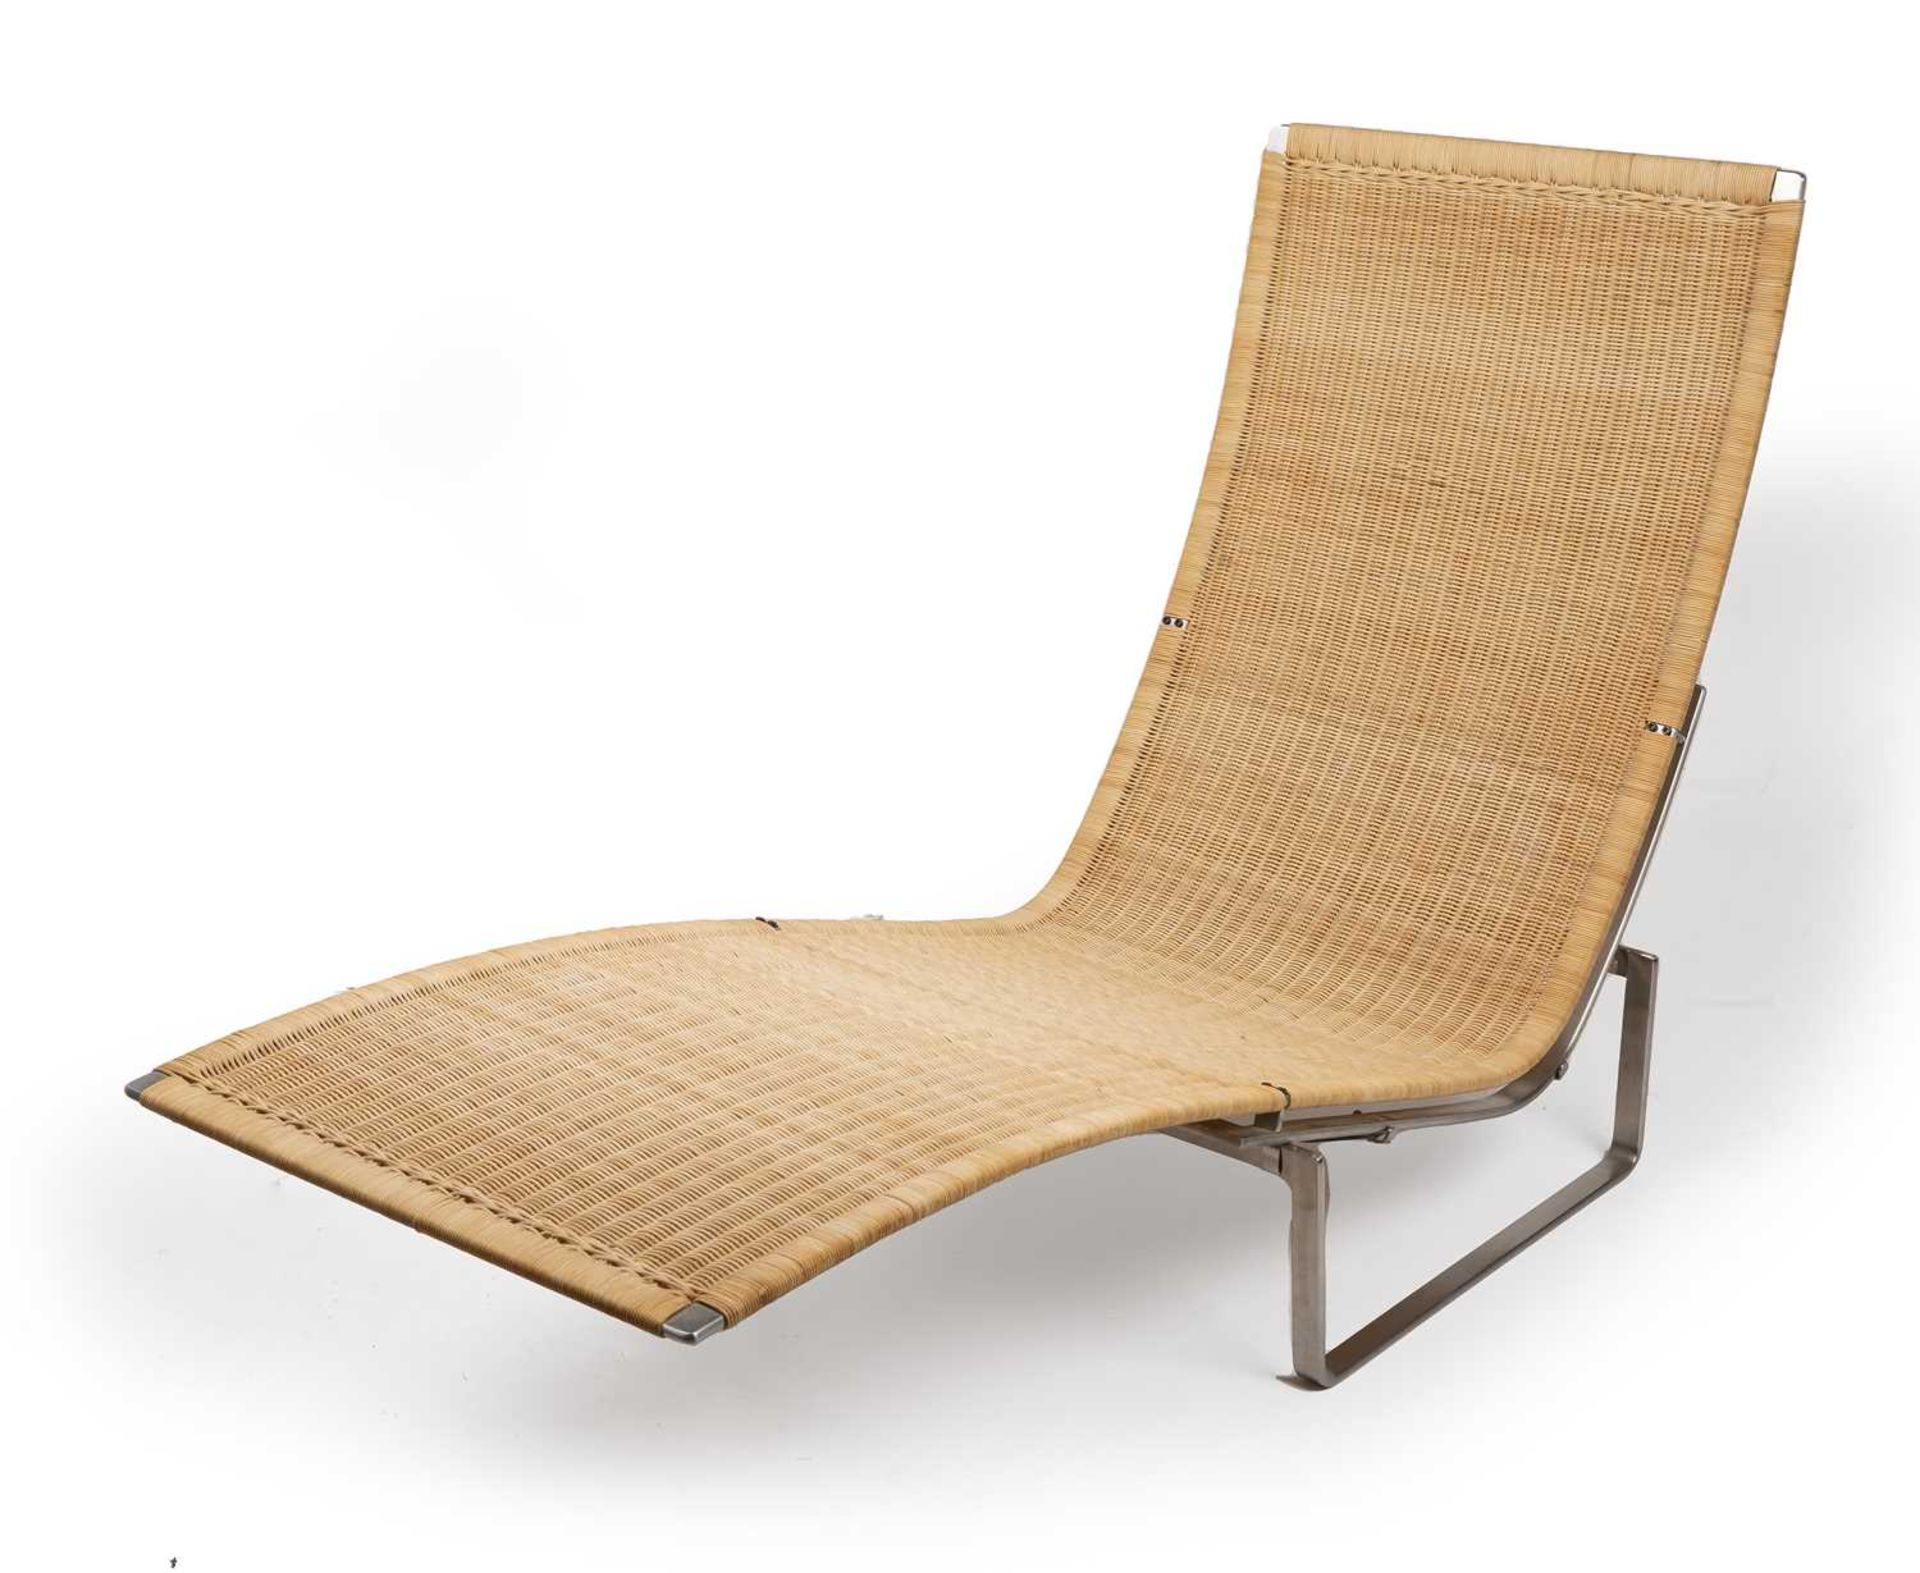 Poul Kjaerholm (1929-1980) for Fritz Hansen PK24 lounge chair the wicker seat with metal frame and - Image 4 of 4